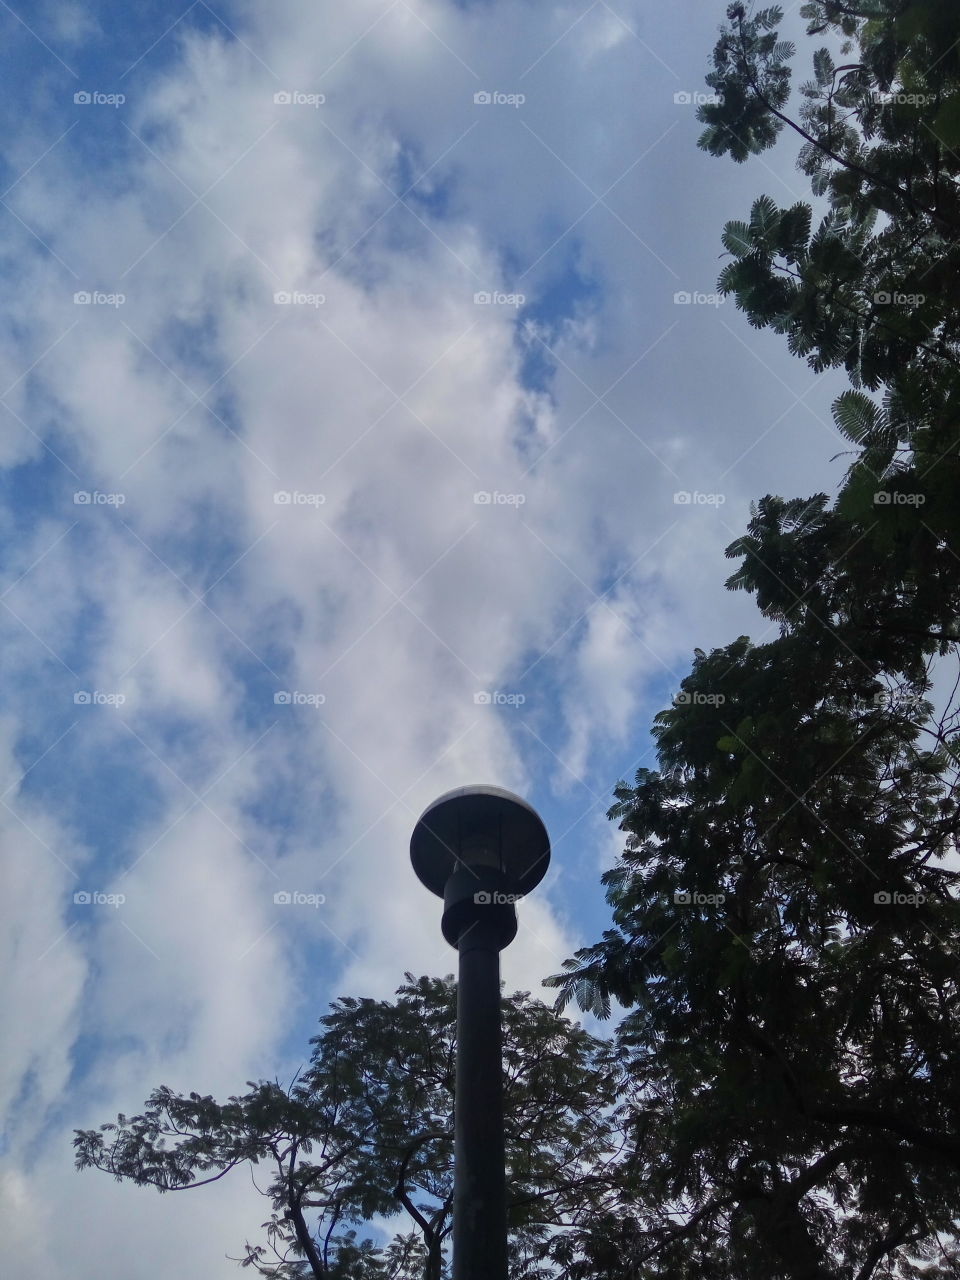 blue sky with cloud, lamppost and trees.